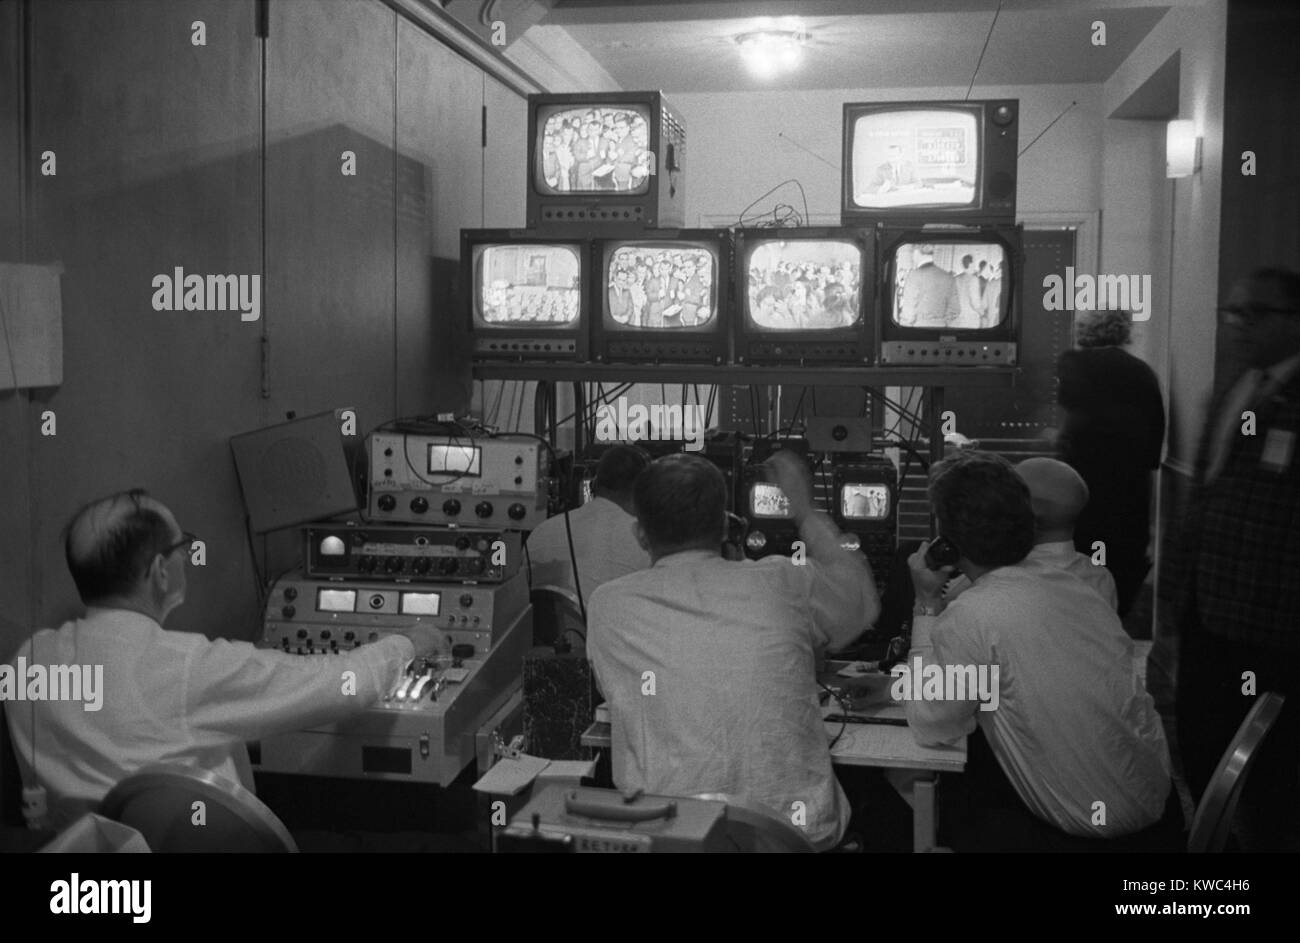 Broadcasting technicians, seated in front of bank of television sets at the Democratic Headquarters. Election Night, November 3, 1964, at the Mayflower Hotel in Washington, D.C. (BSLOC_2015_2_215) Stock Photo